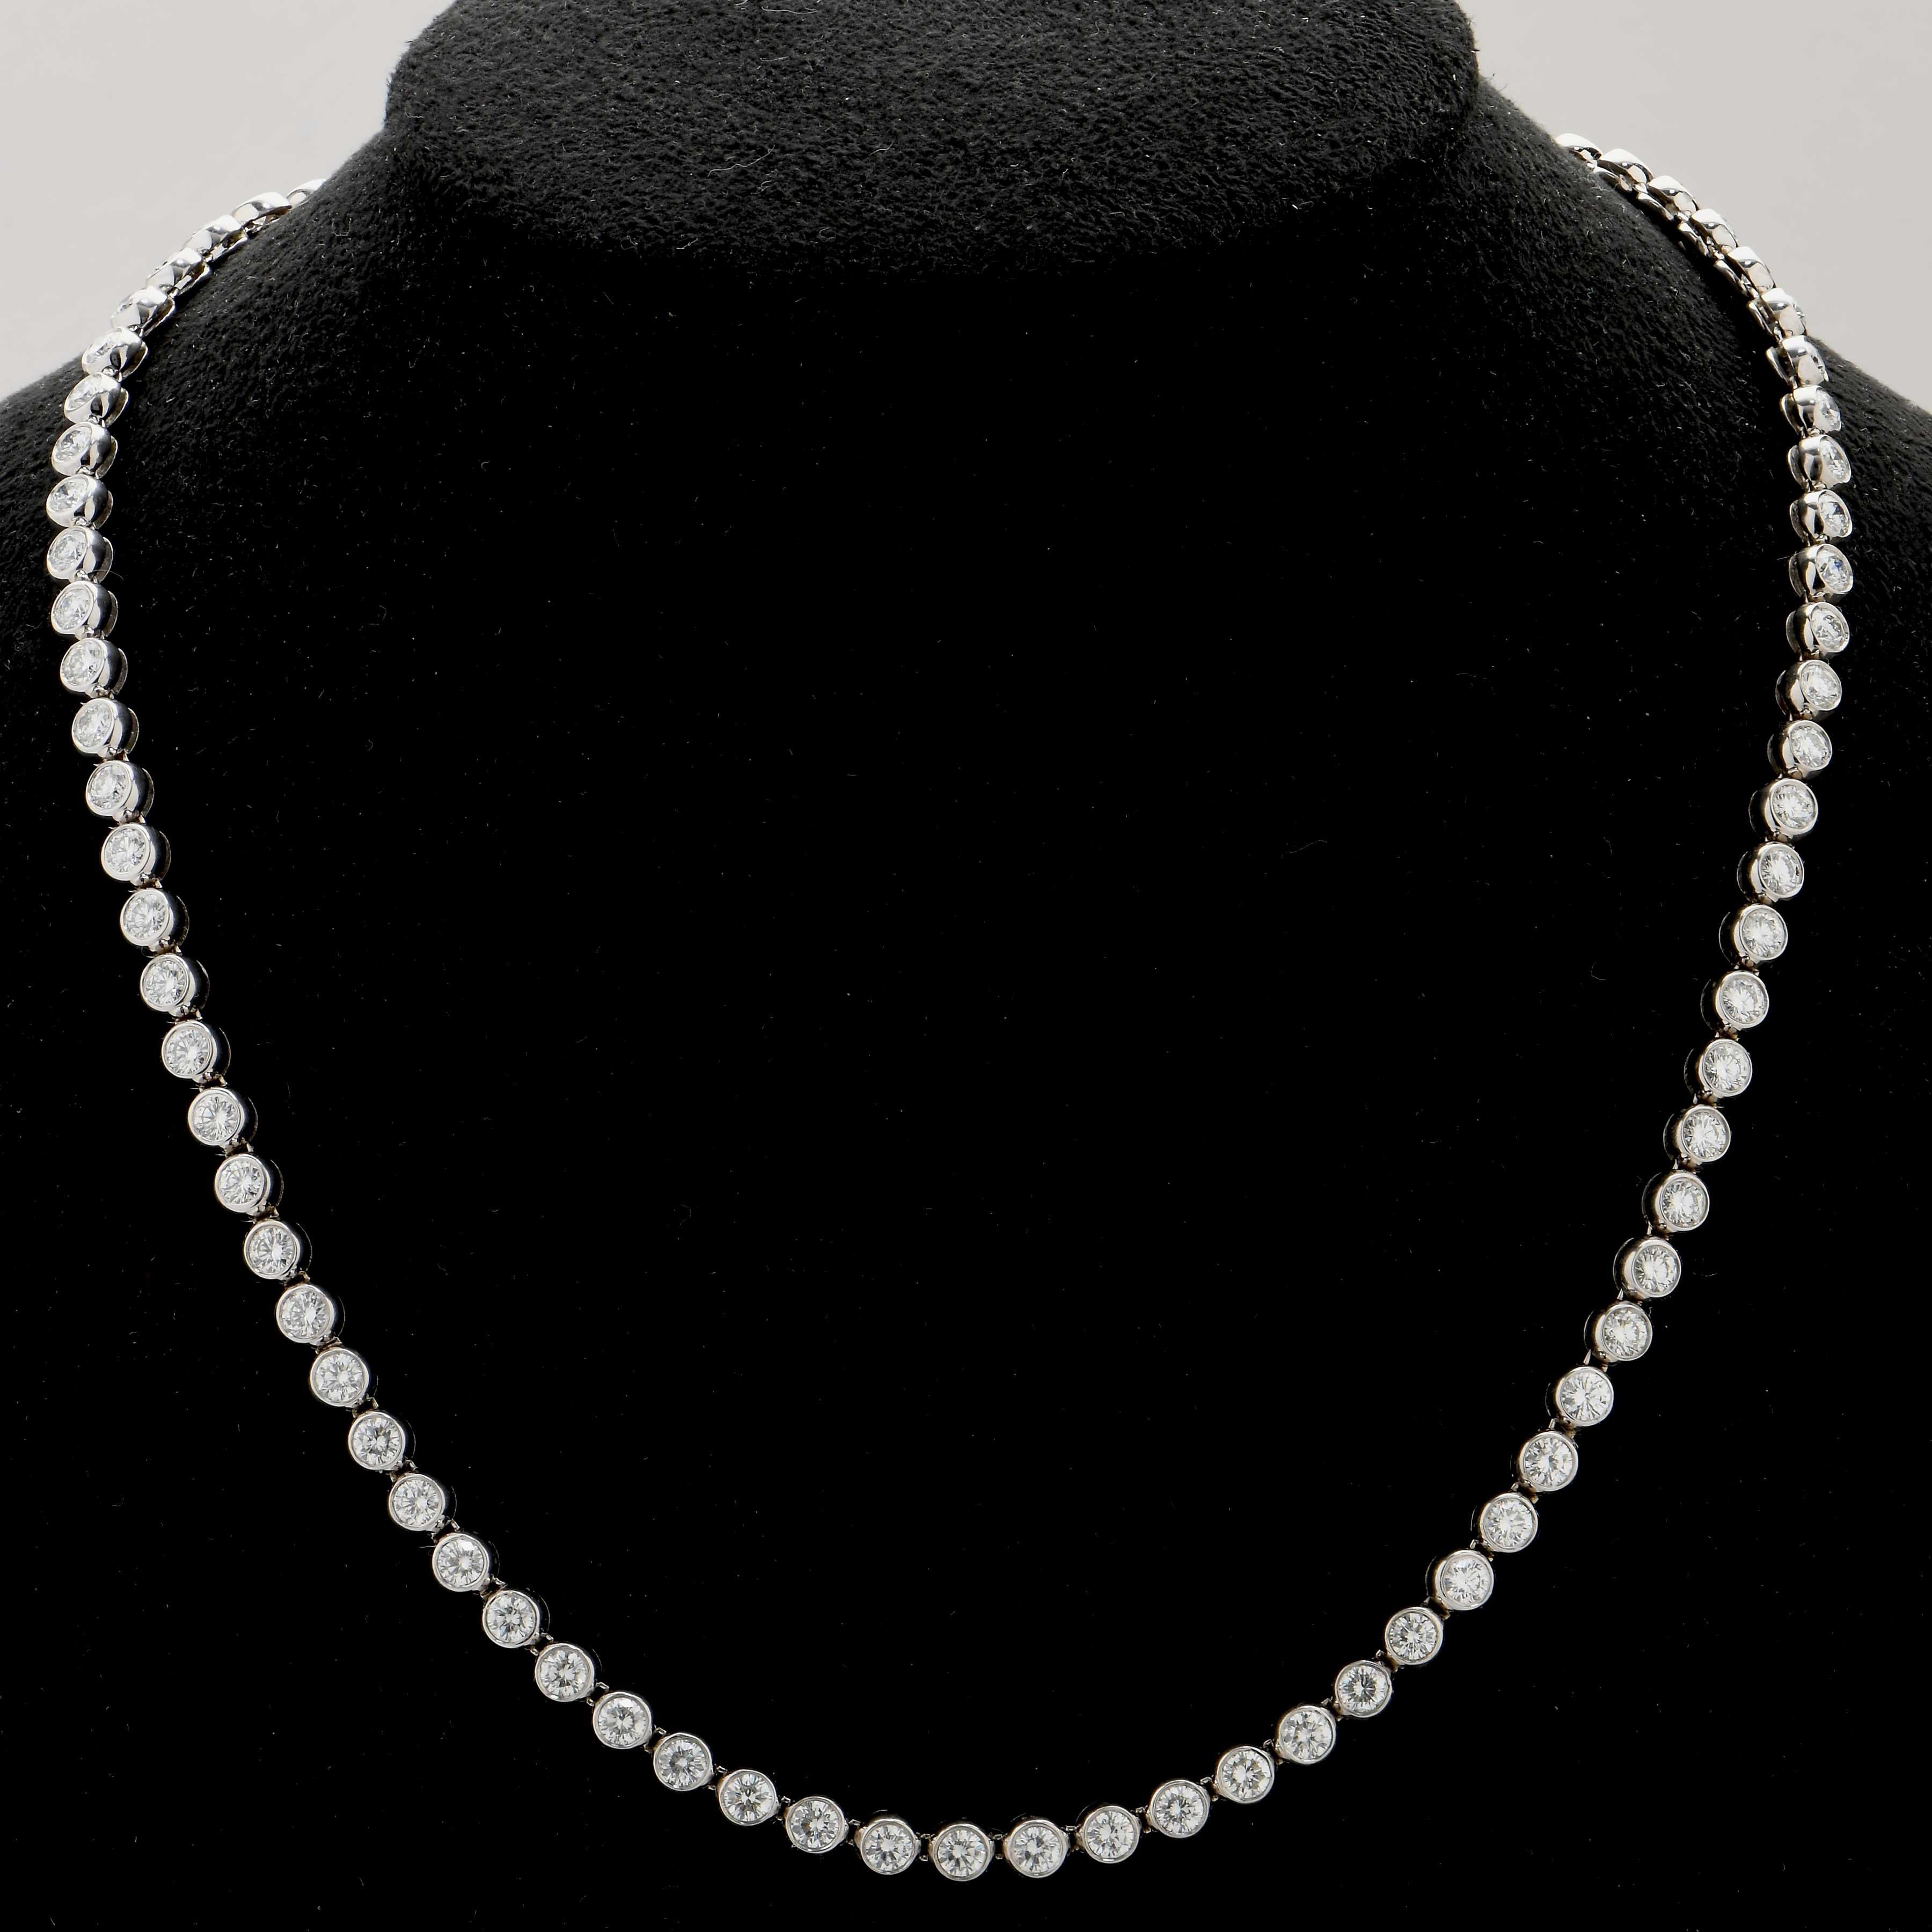 This beautiful Riviera necklace features 87 round brilliant cut diamonds with an estimated total weight of 10 carats of very well cut H color SI clarity diamonds.
16 inches in length.
Metal: 18 Karat White Gold
Weight: 29.4 Grams
